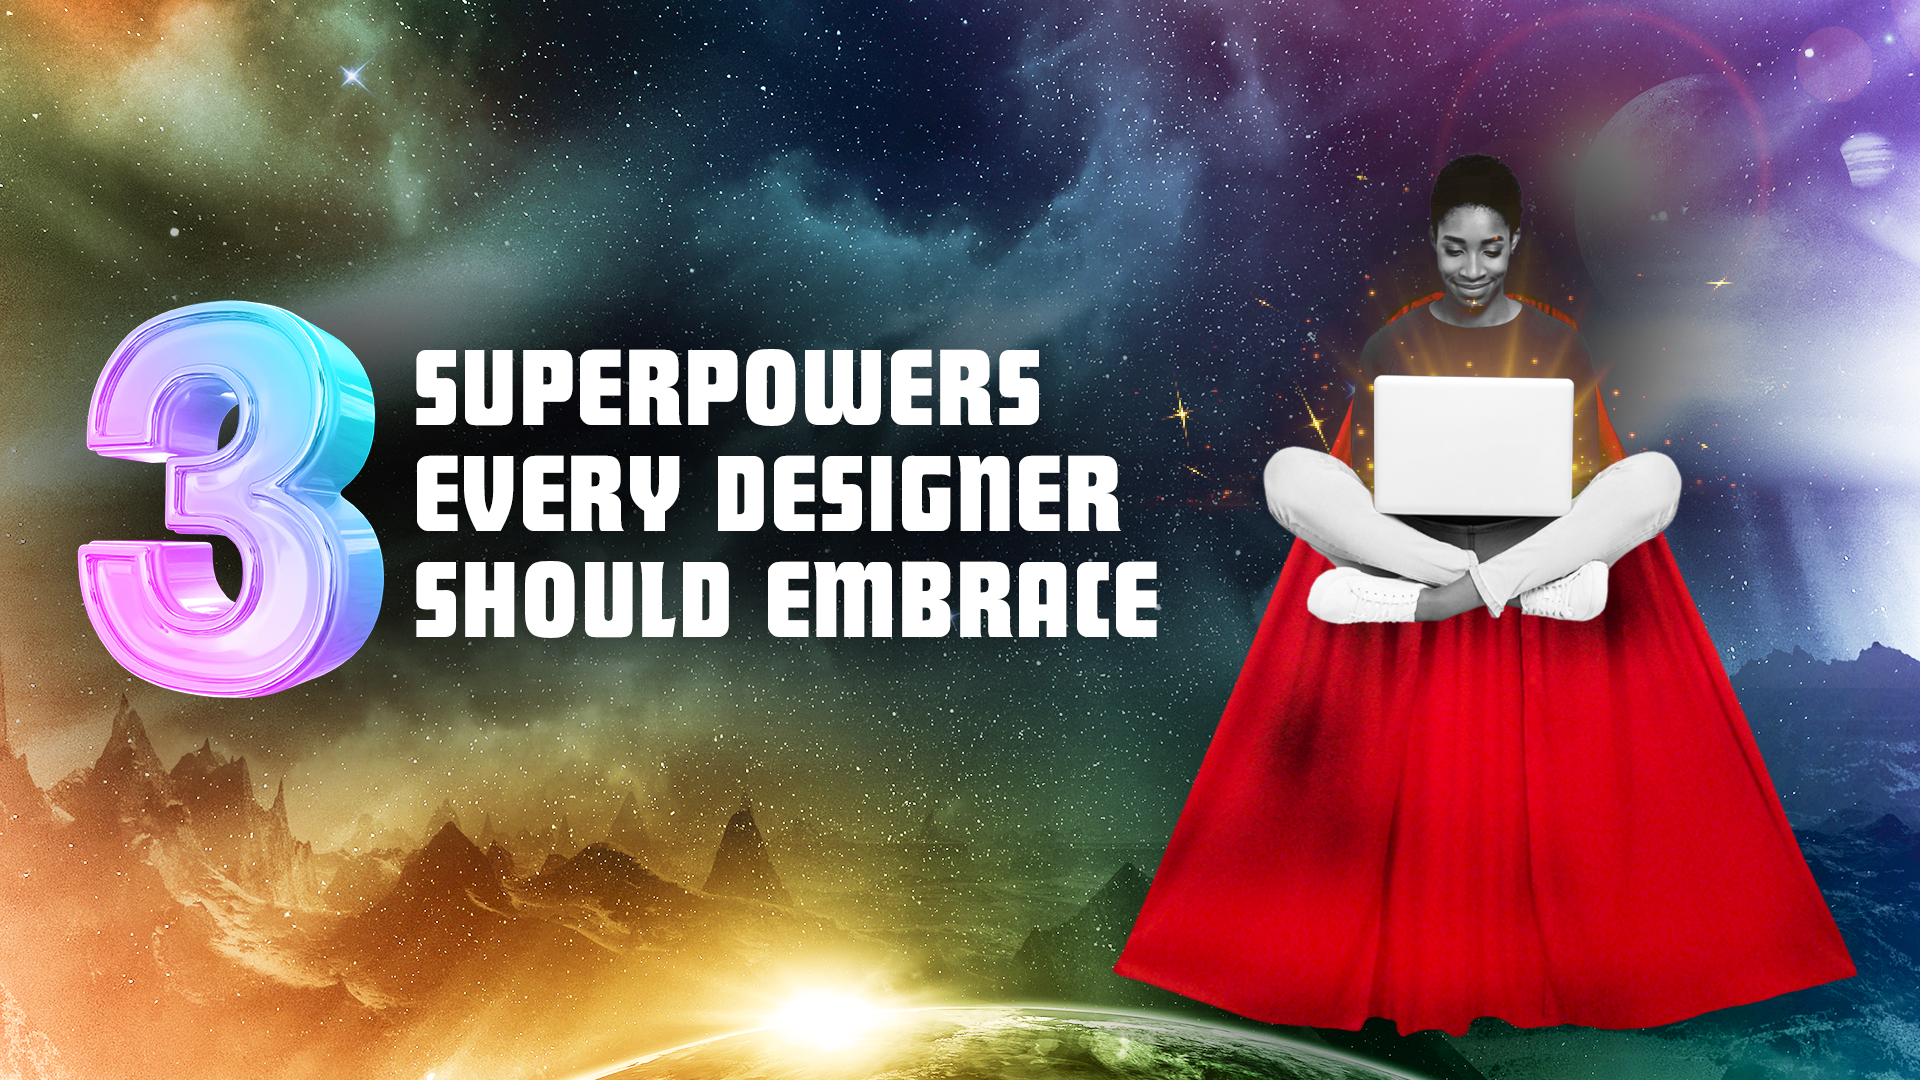 Three Superpowers Every Designer Should Embrace